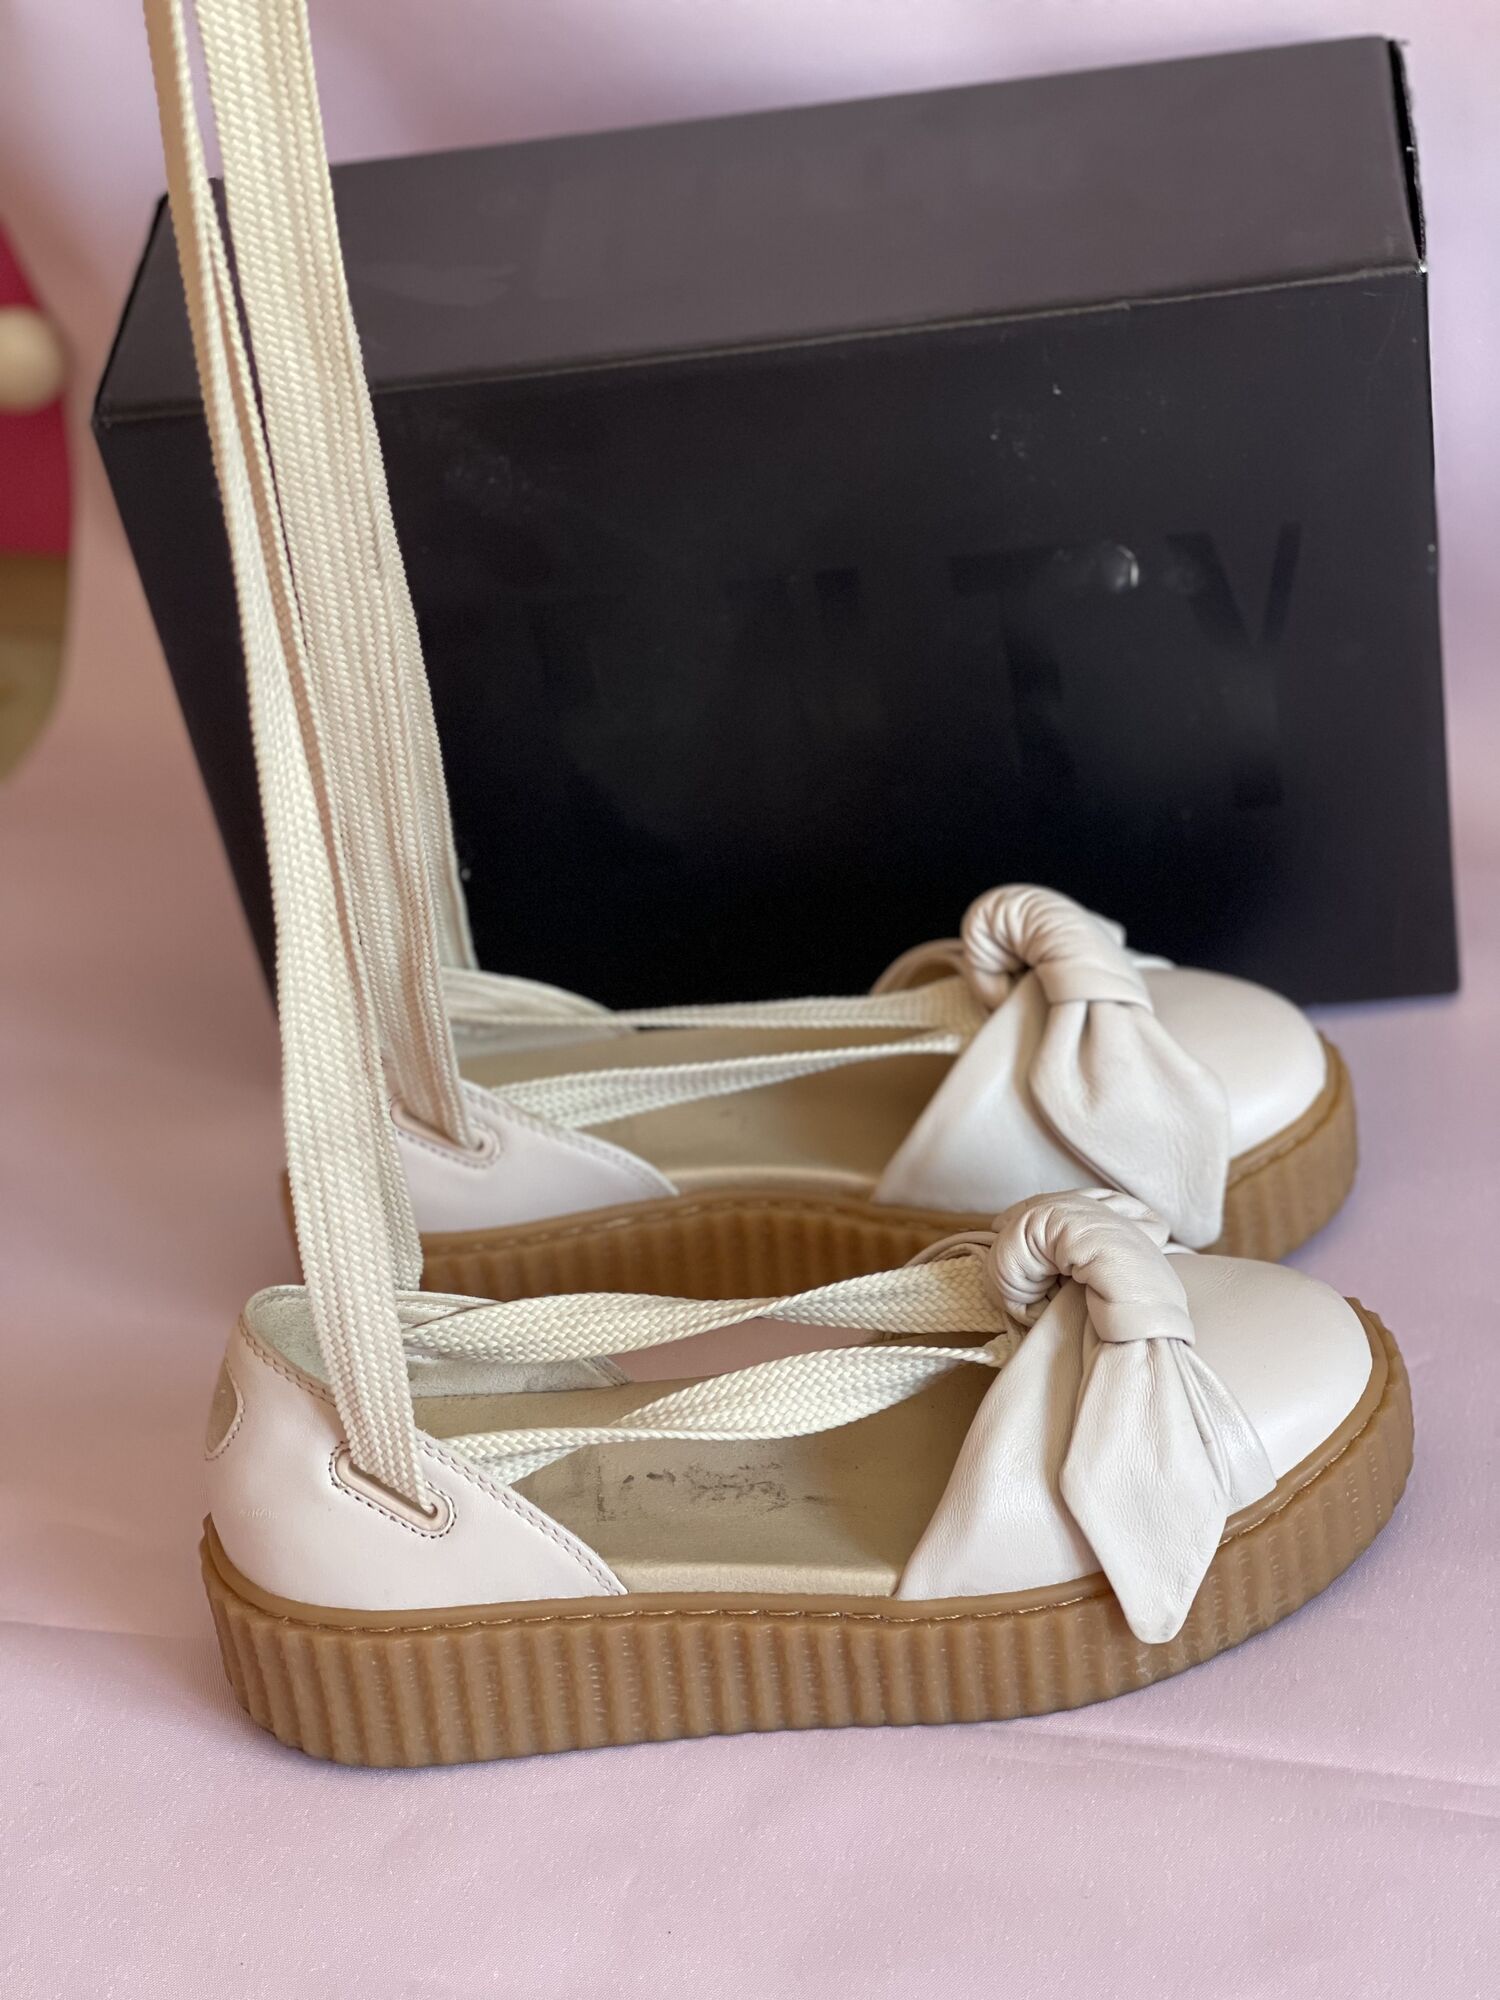 mayor Guia Paciencia Leather Bow Creeper Sandal Espadrilles Fenty x Puma - IT 37.5, buy  pre-owned at 50 EUR